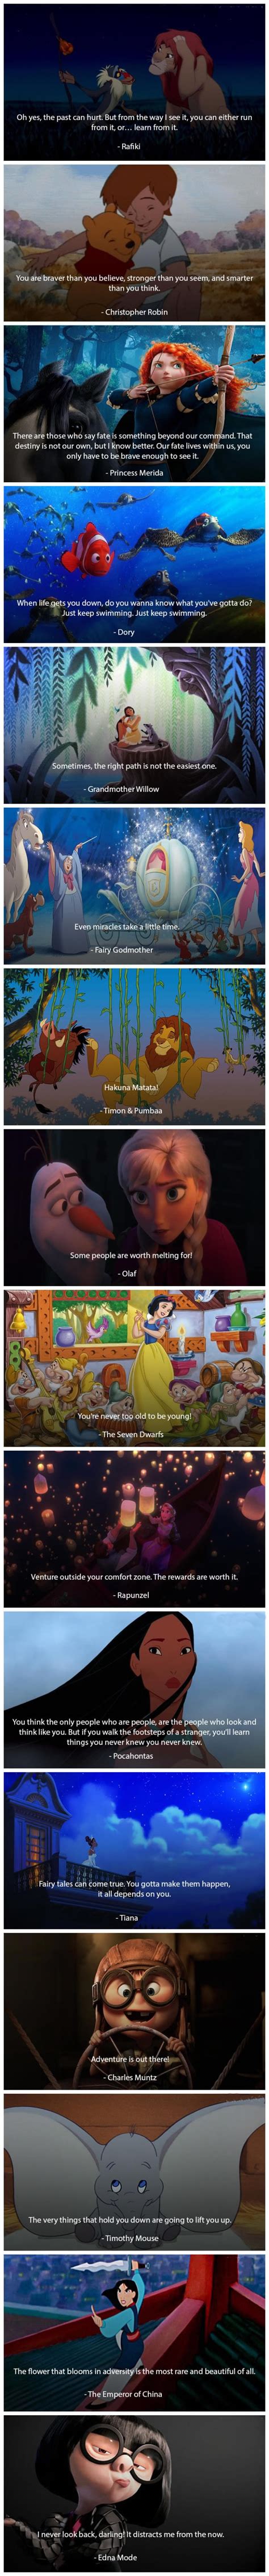 This is just a page to give you a daily smile by reading some of your favorite movie quotes from disney A Collection of Inspirational Quotes from Animated Movies